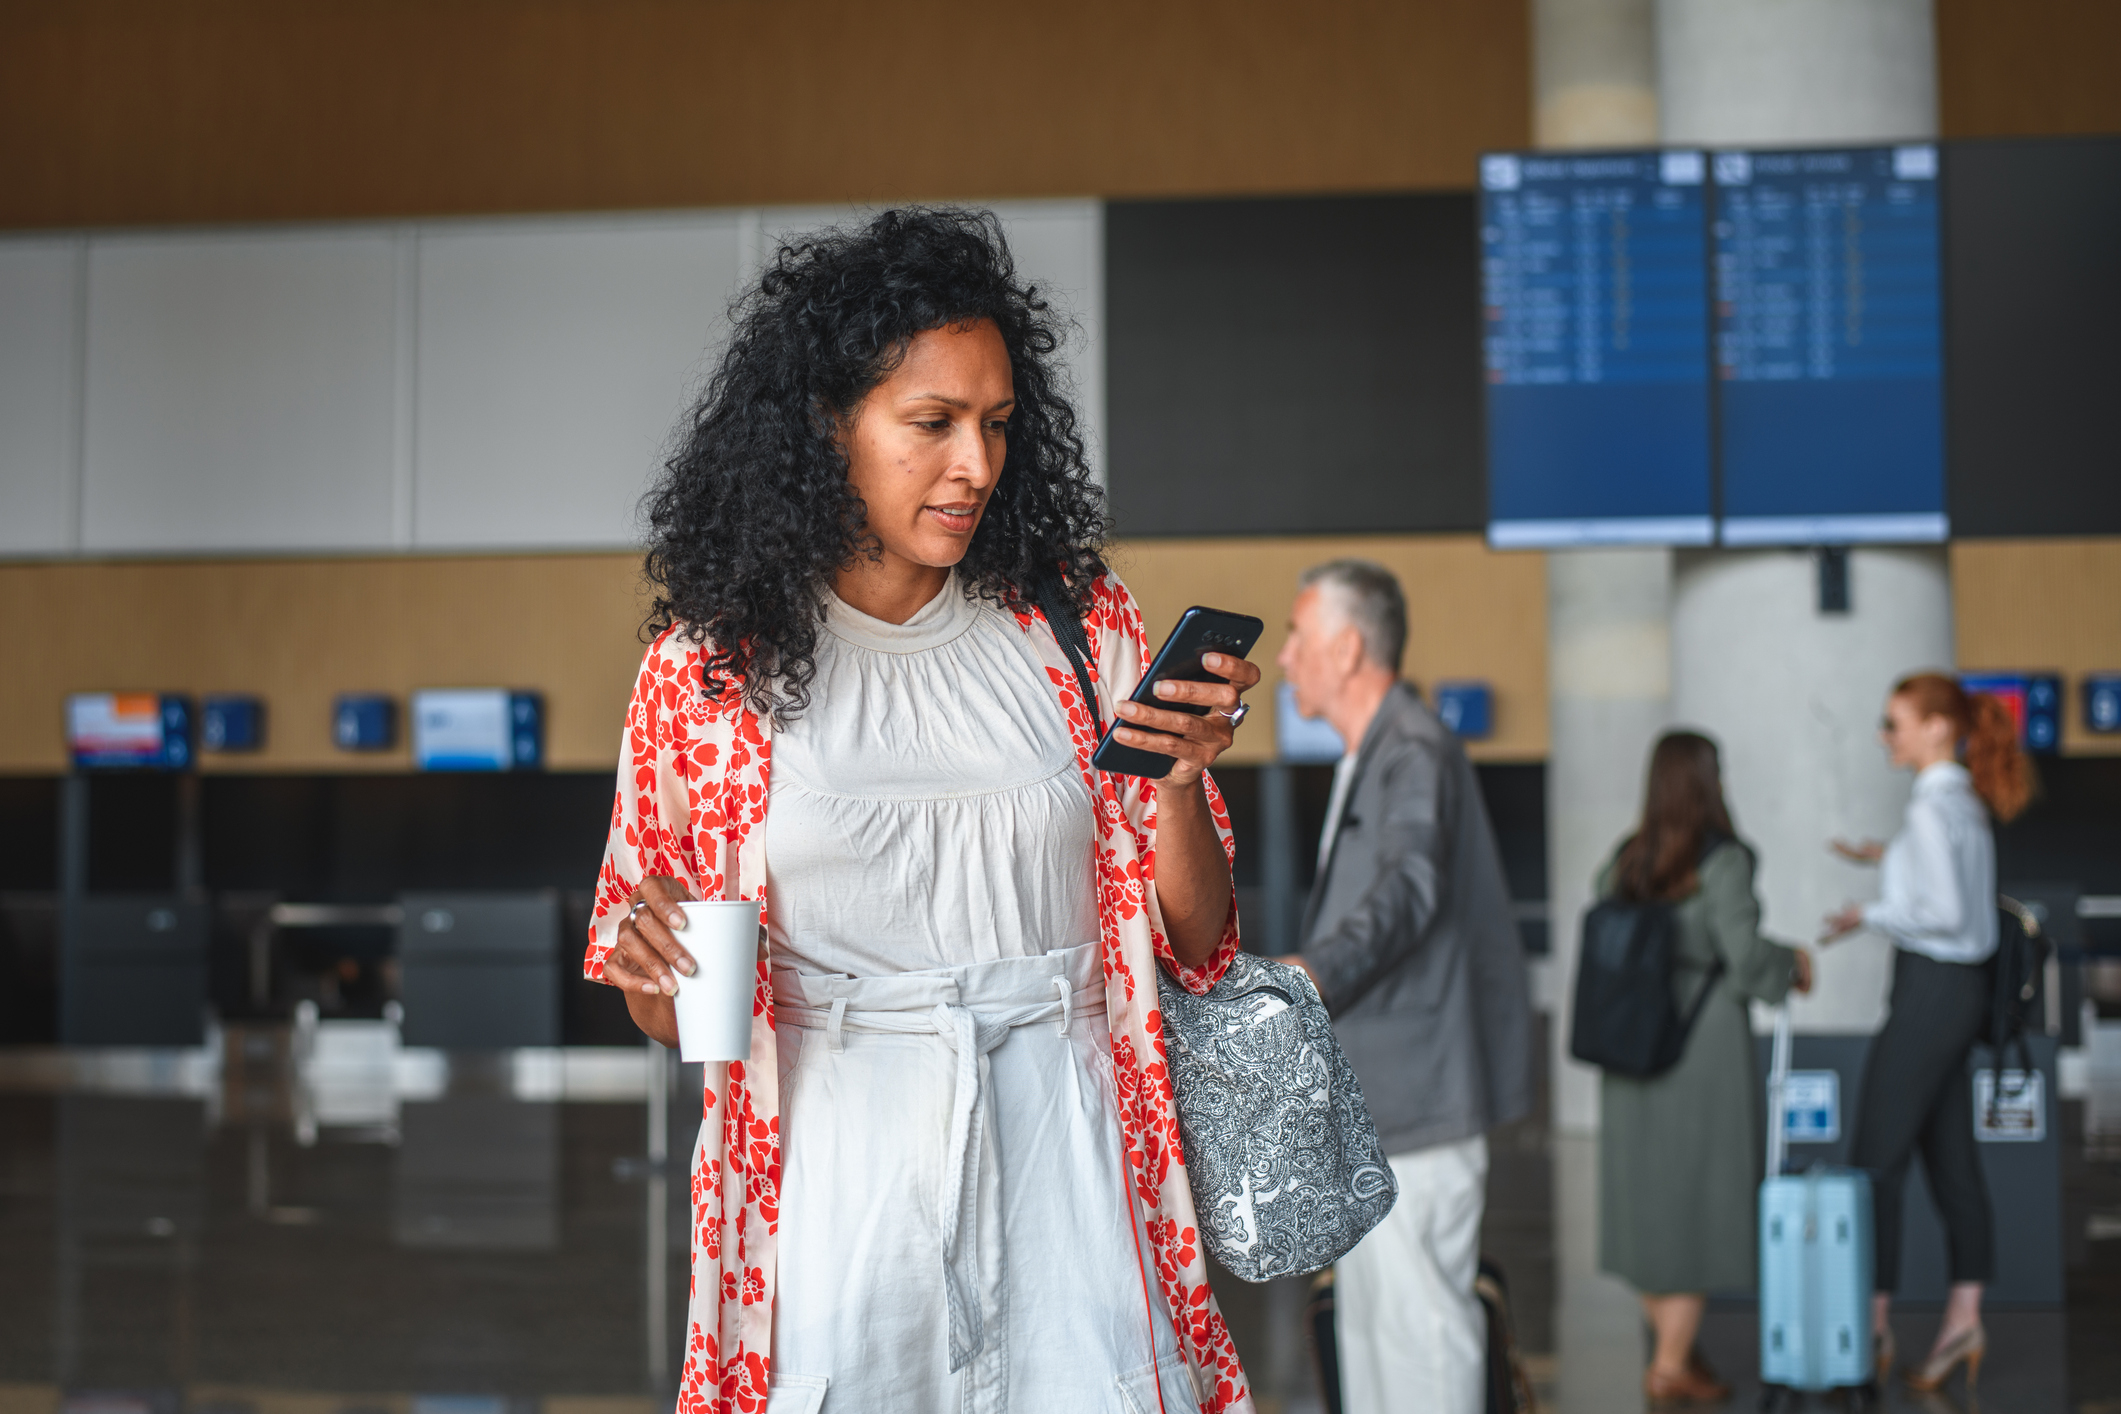 woman holding a phone and coffee at the airport